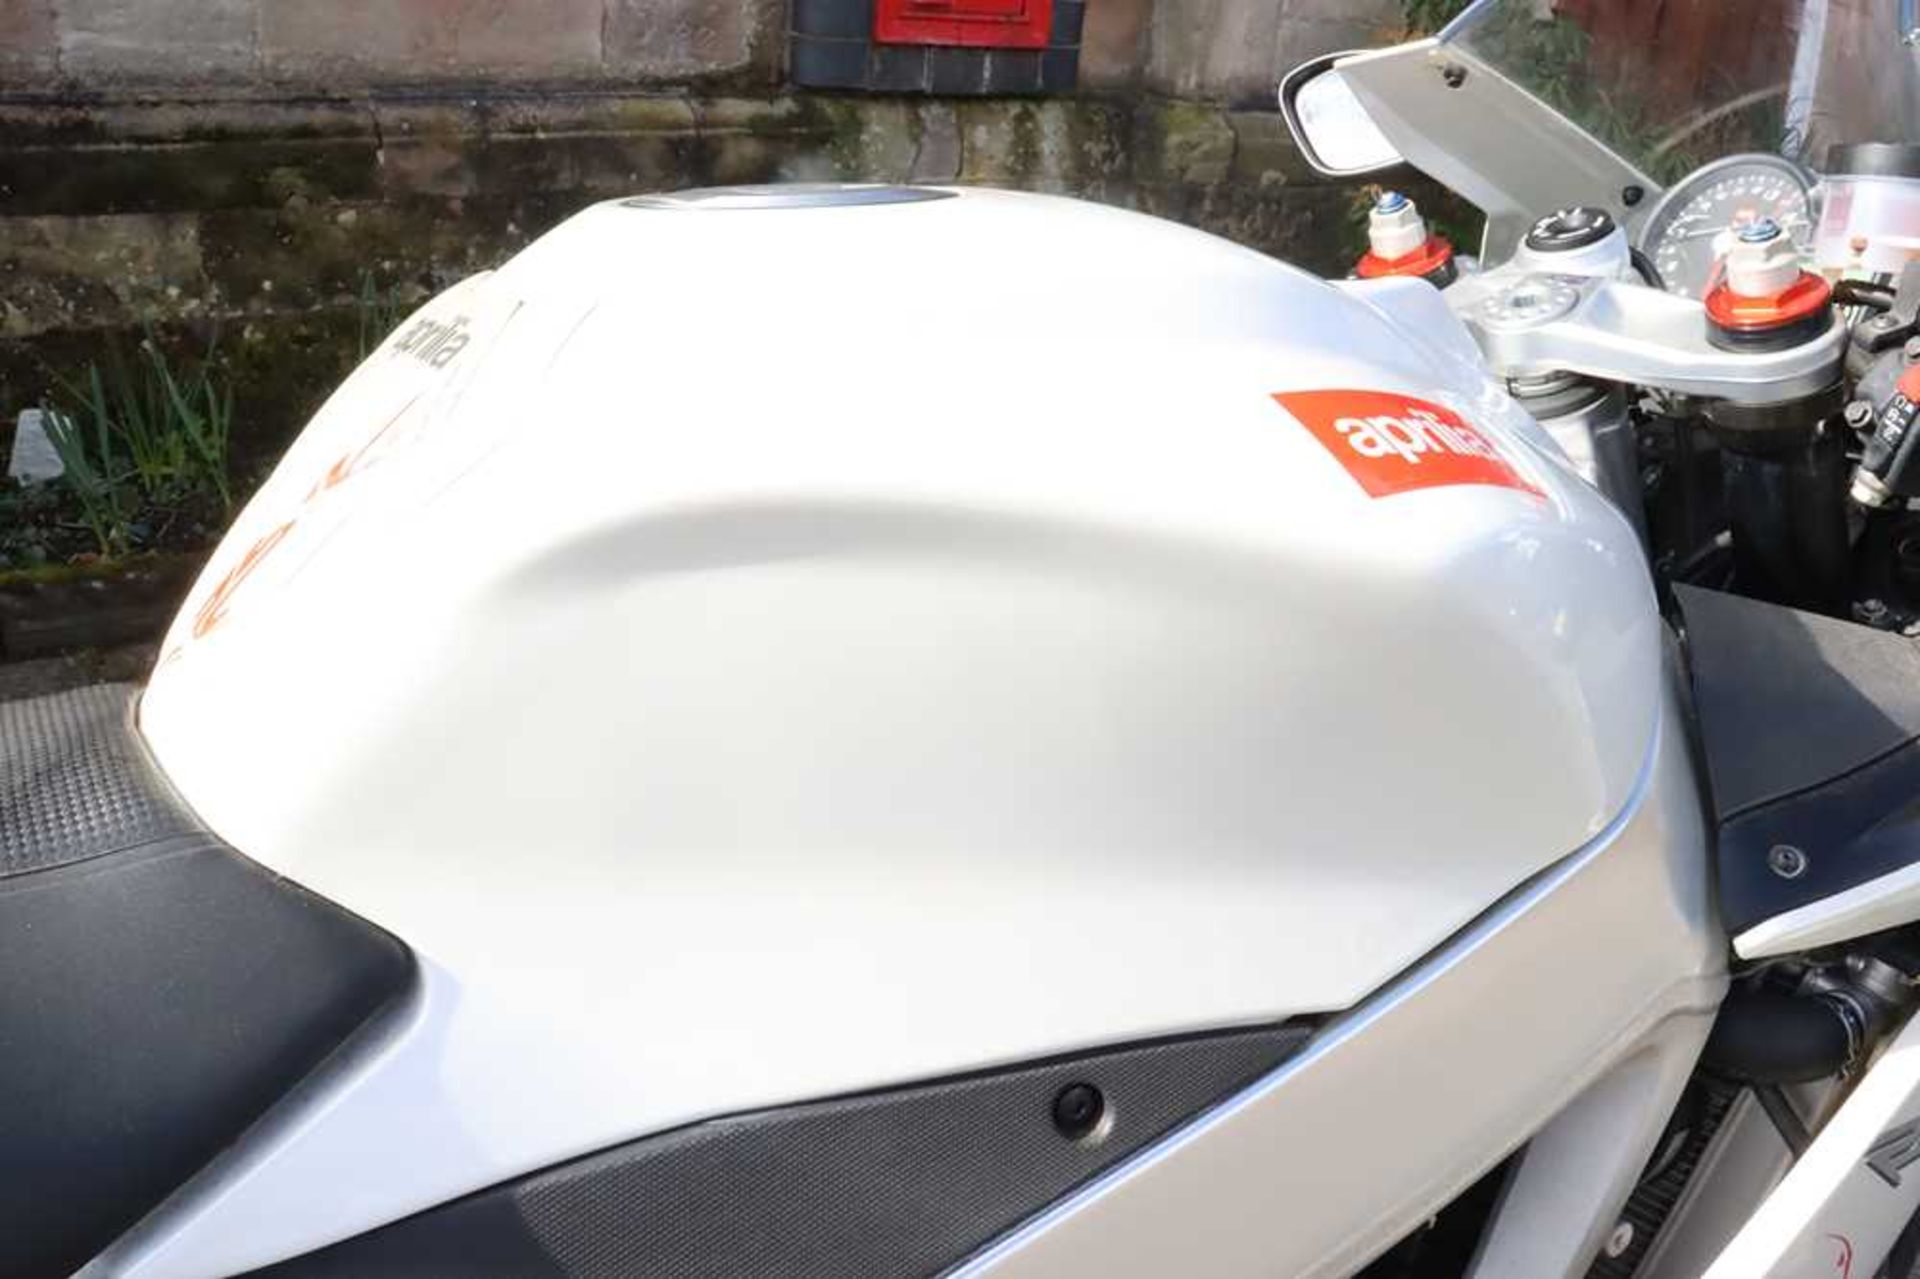 2010 Aprilia RSV4R Fitted with Moto GP style exhaust, original included - Image 15 of 44